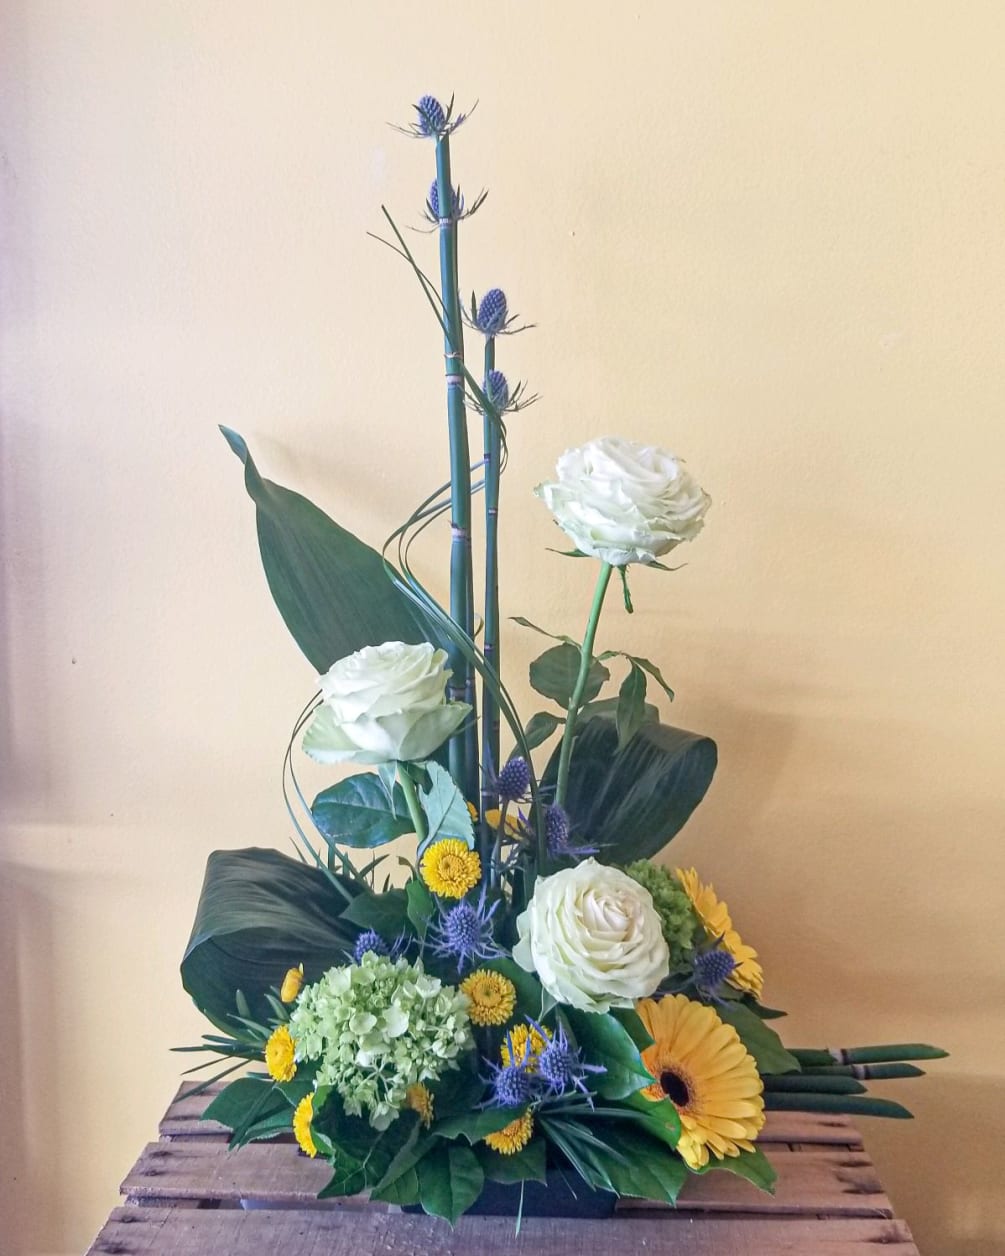 Looking for a floral arrangement that makes a statement ?  This